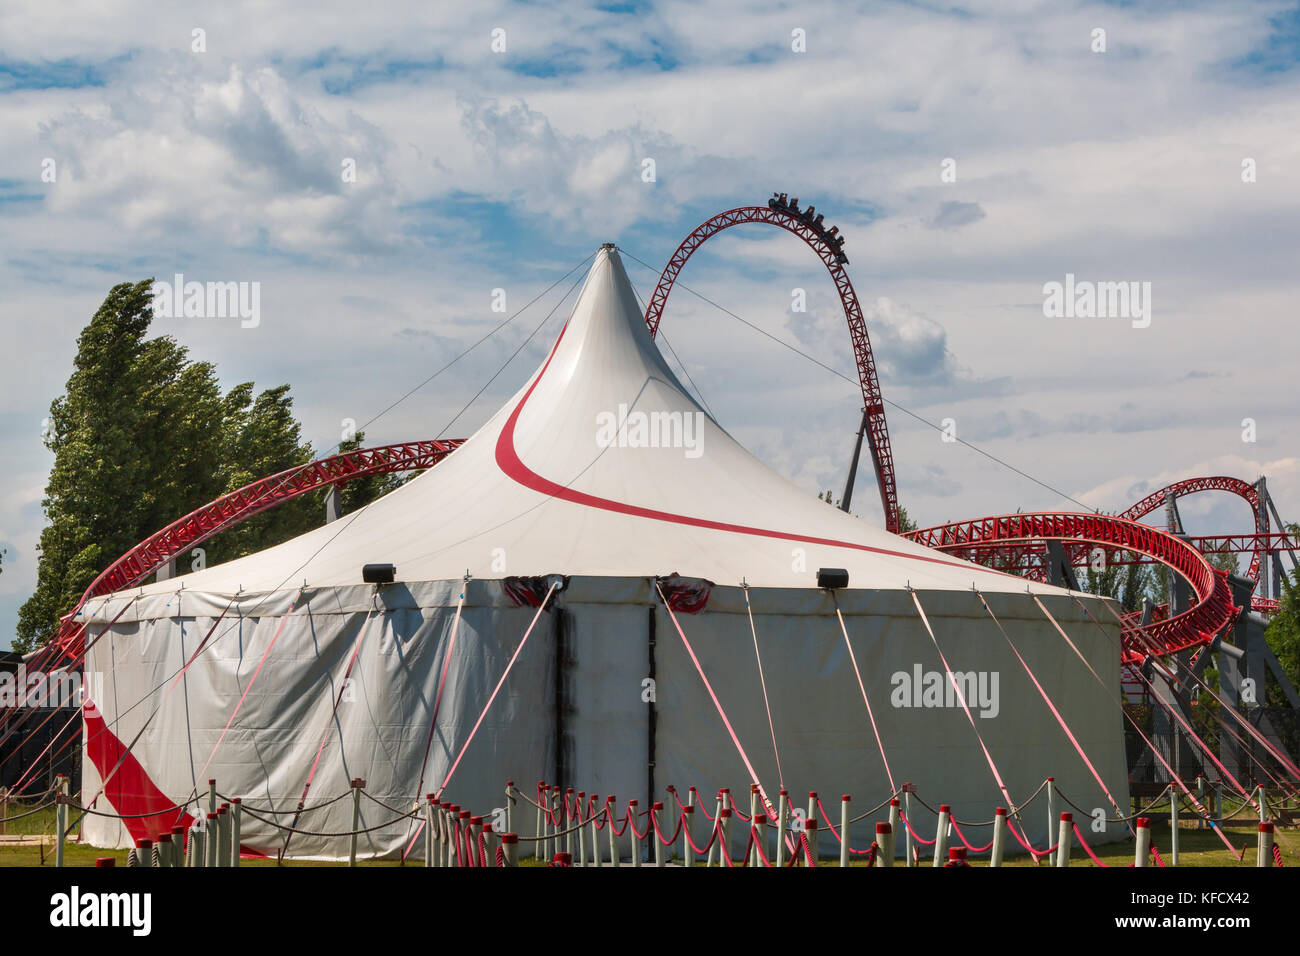 Circus Tent and Red Roller-coaster inside Public Amusement Park. Stock Photo